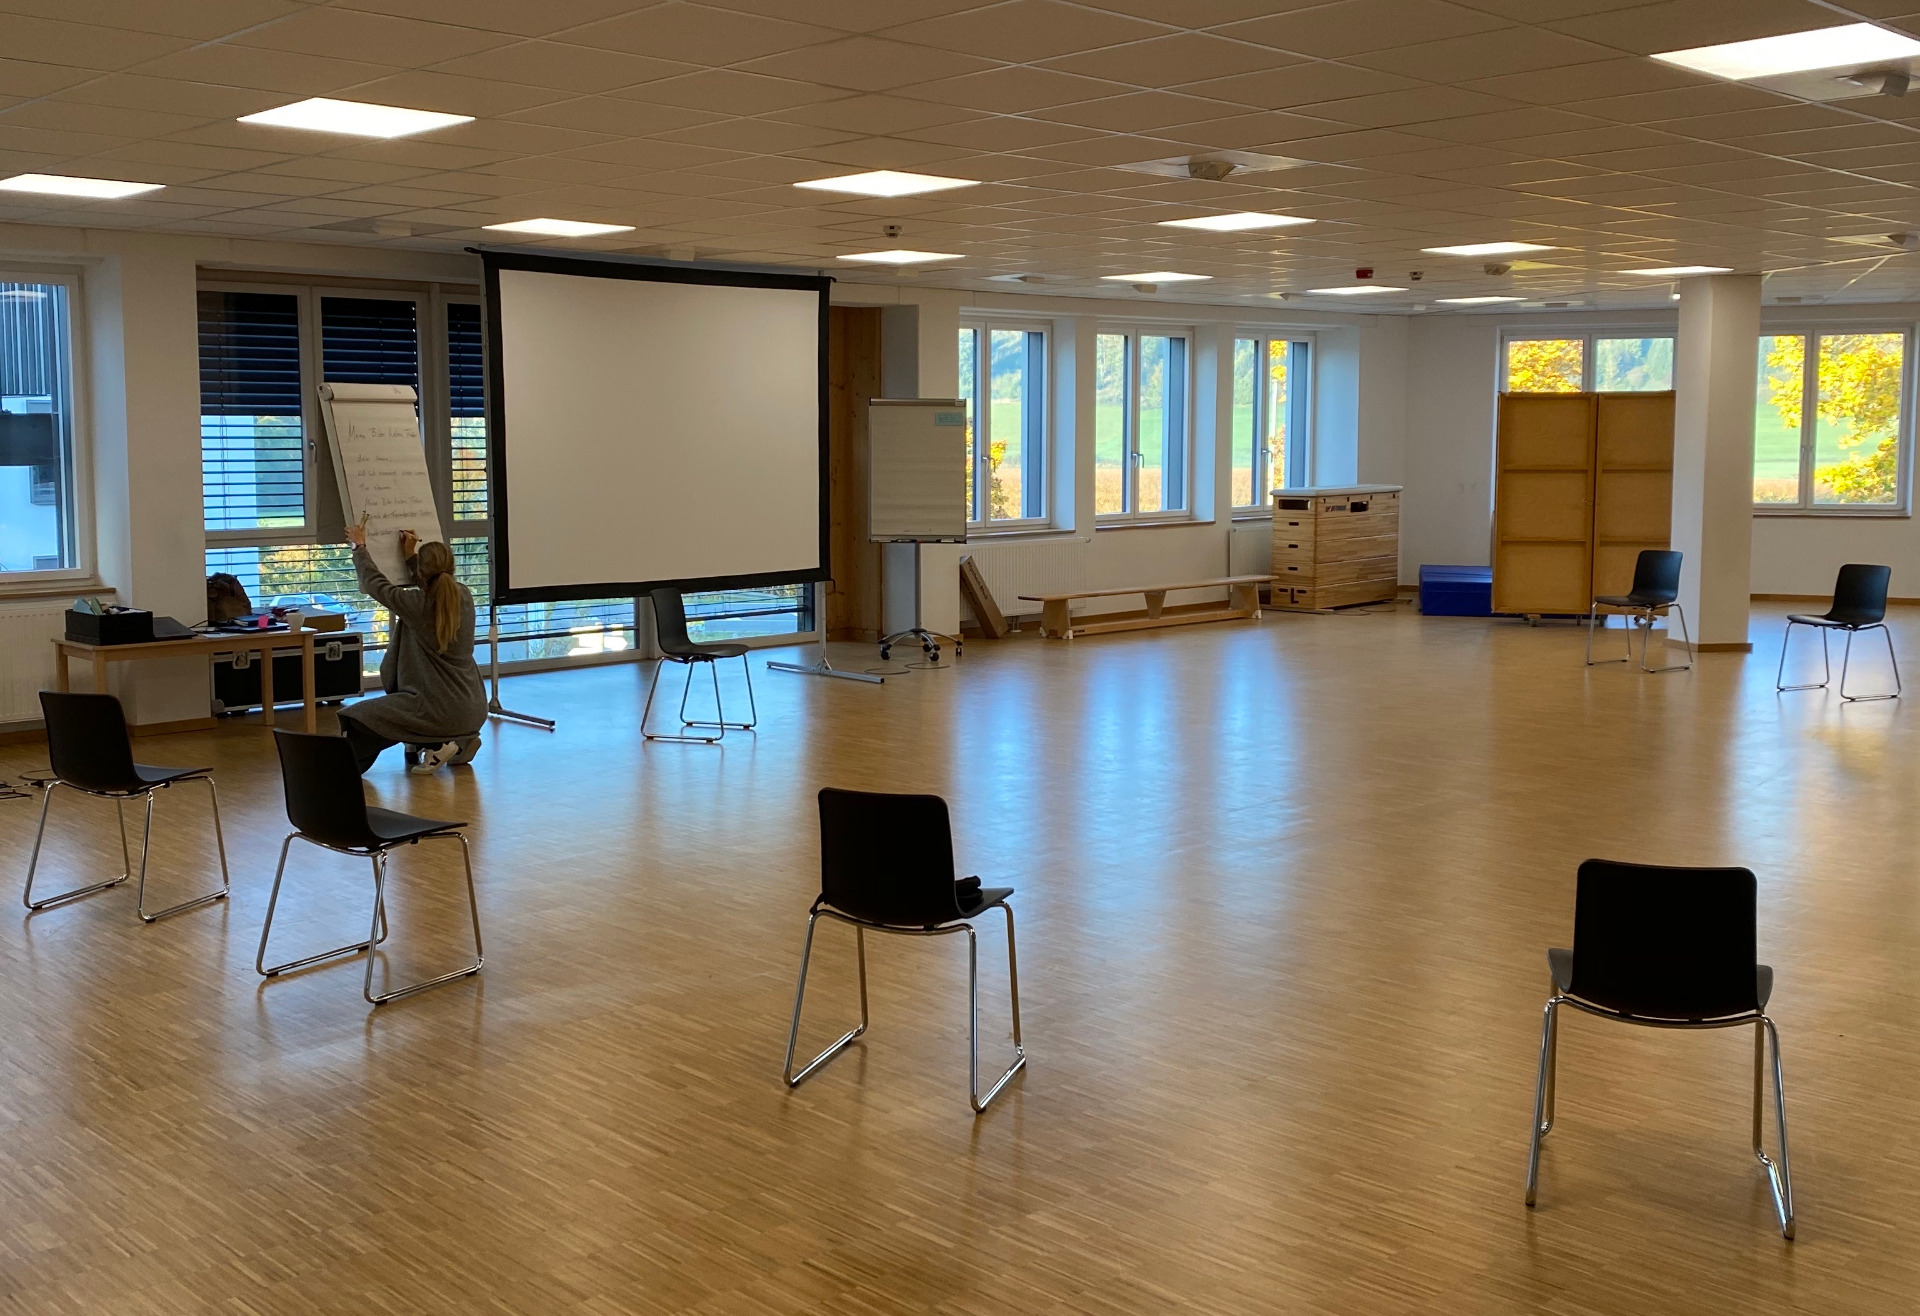 Learning together while keeping a distance – in our spacious, well-ventilated sports room, we can conduct training courses while maintaining high hygiene standards.